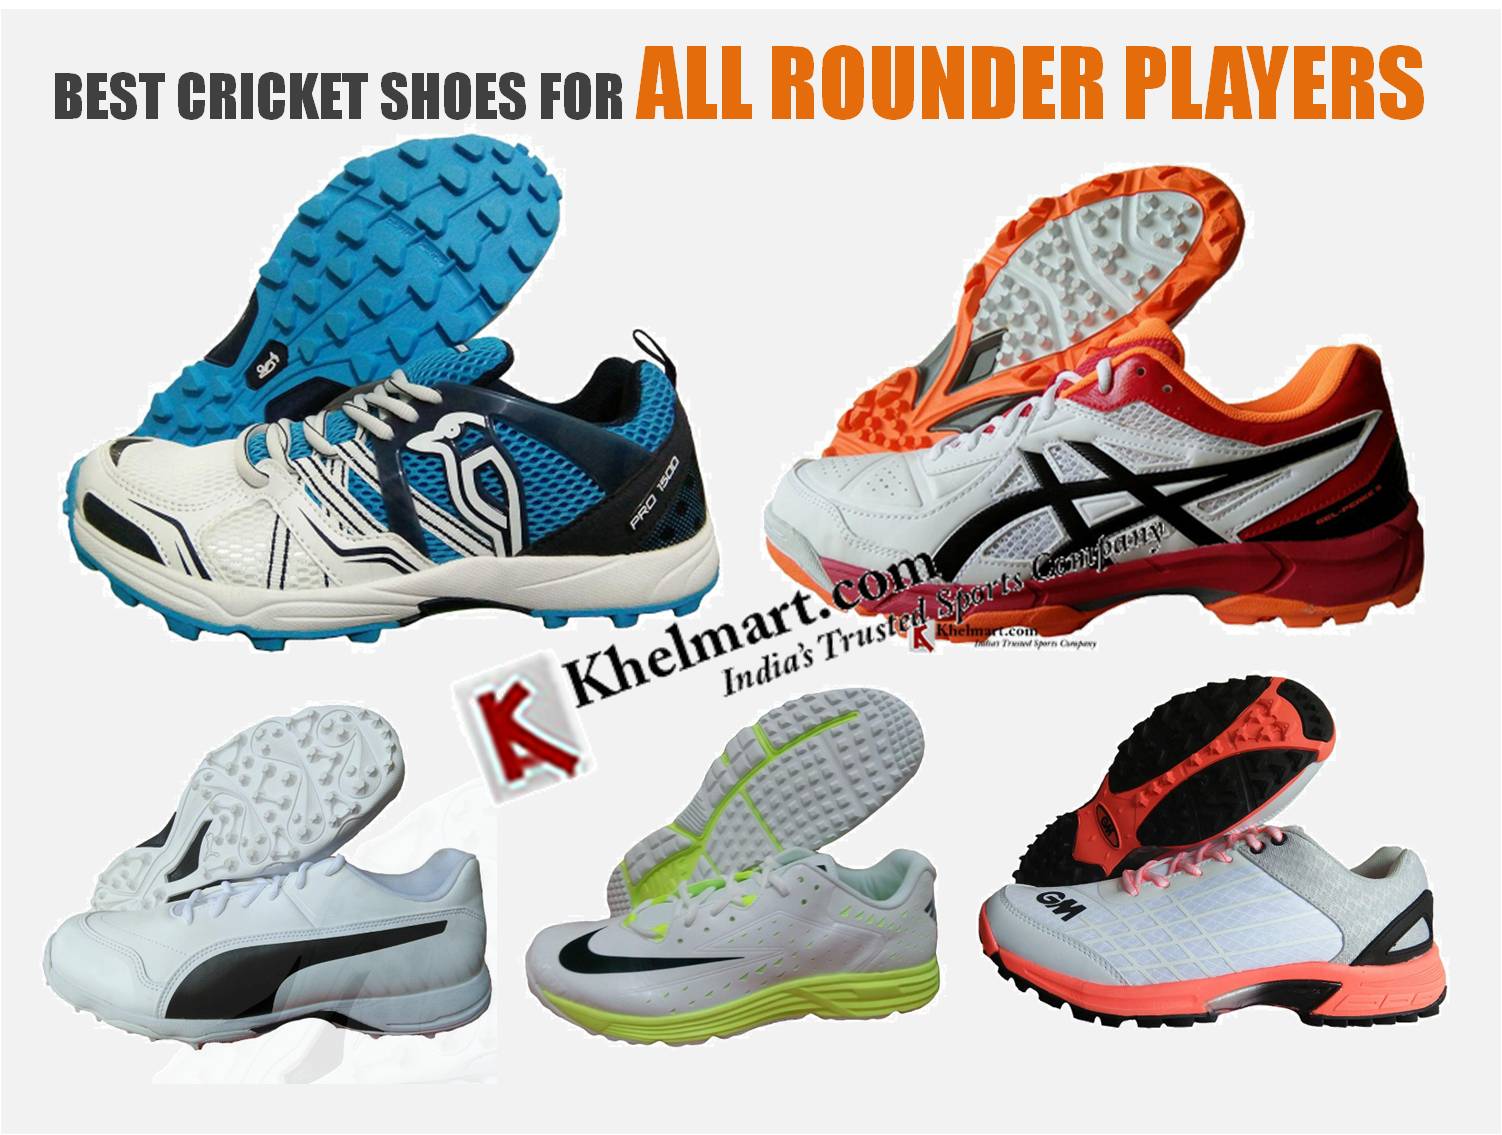 BEST_CRICKET_SHOES_FOR_ALL_ROUNDER_PLAYERS.jpg 